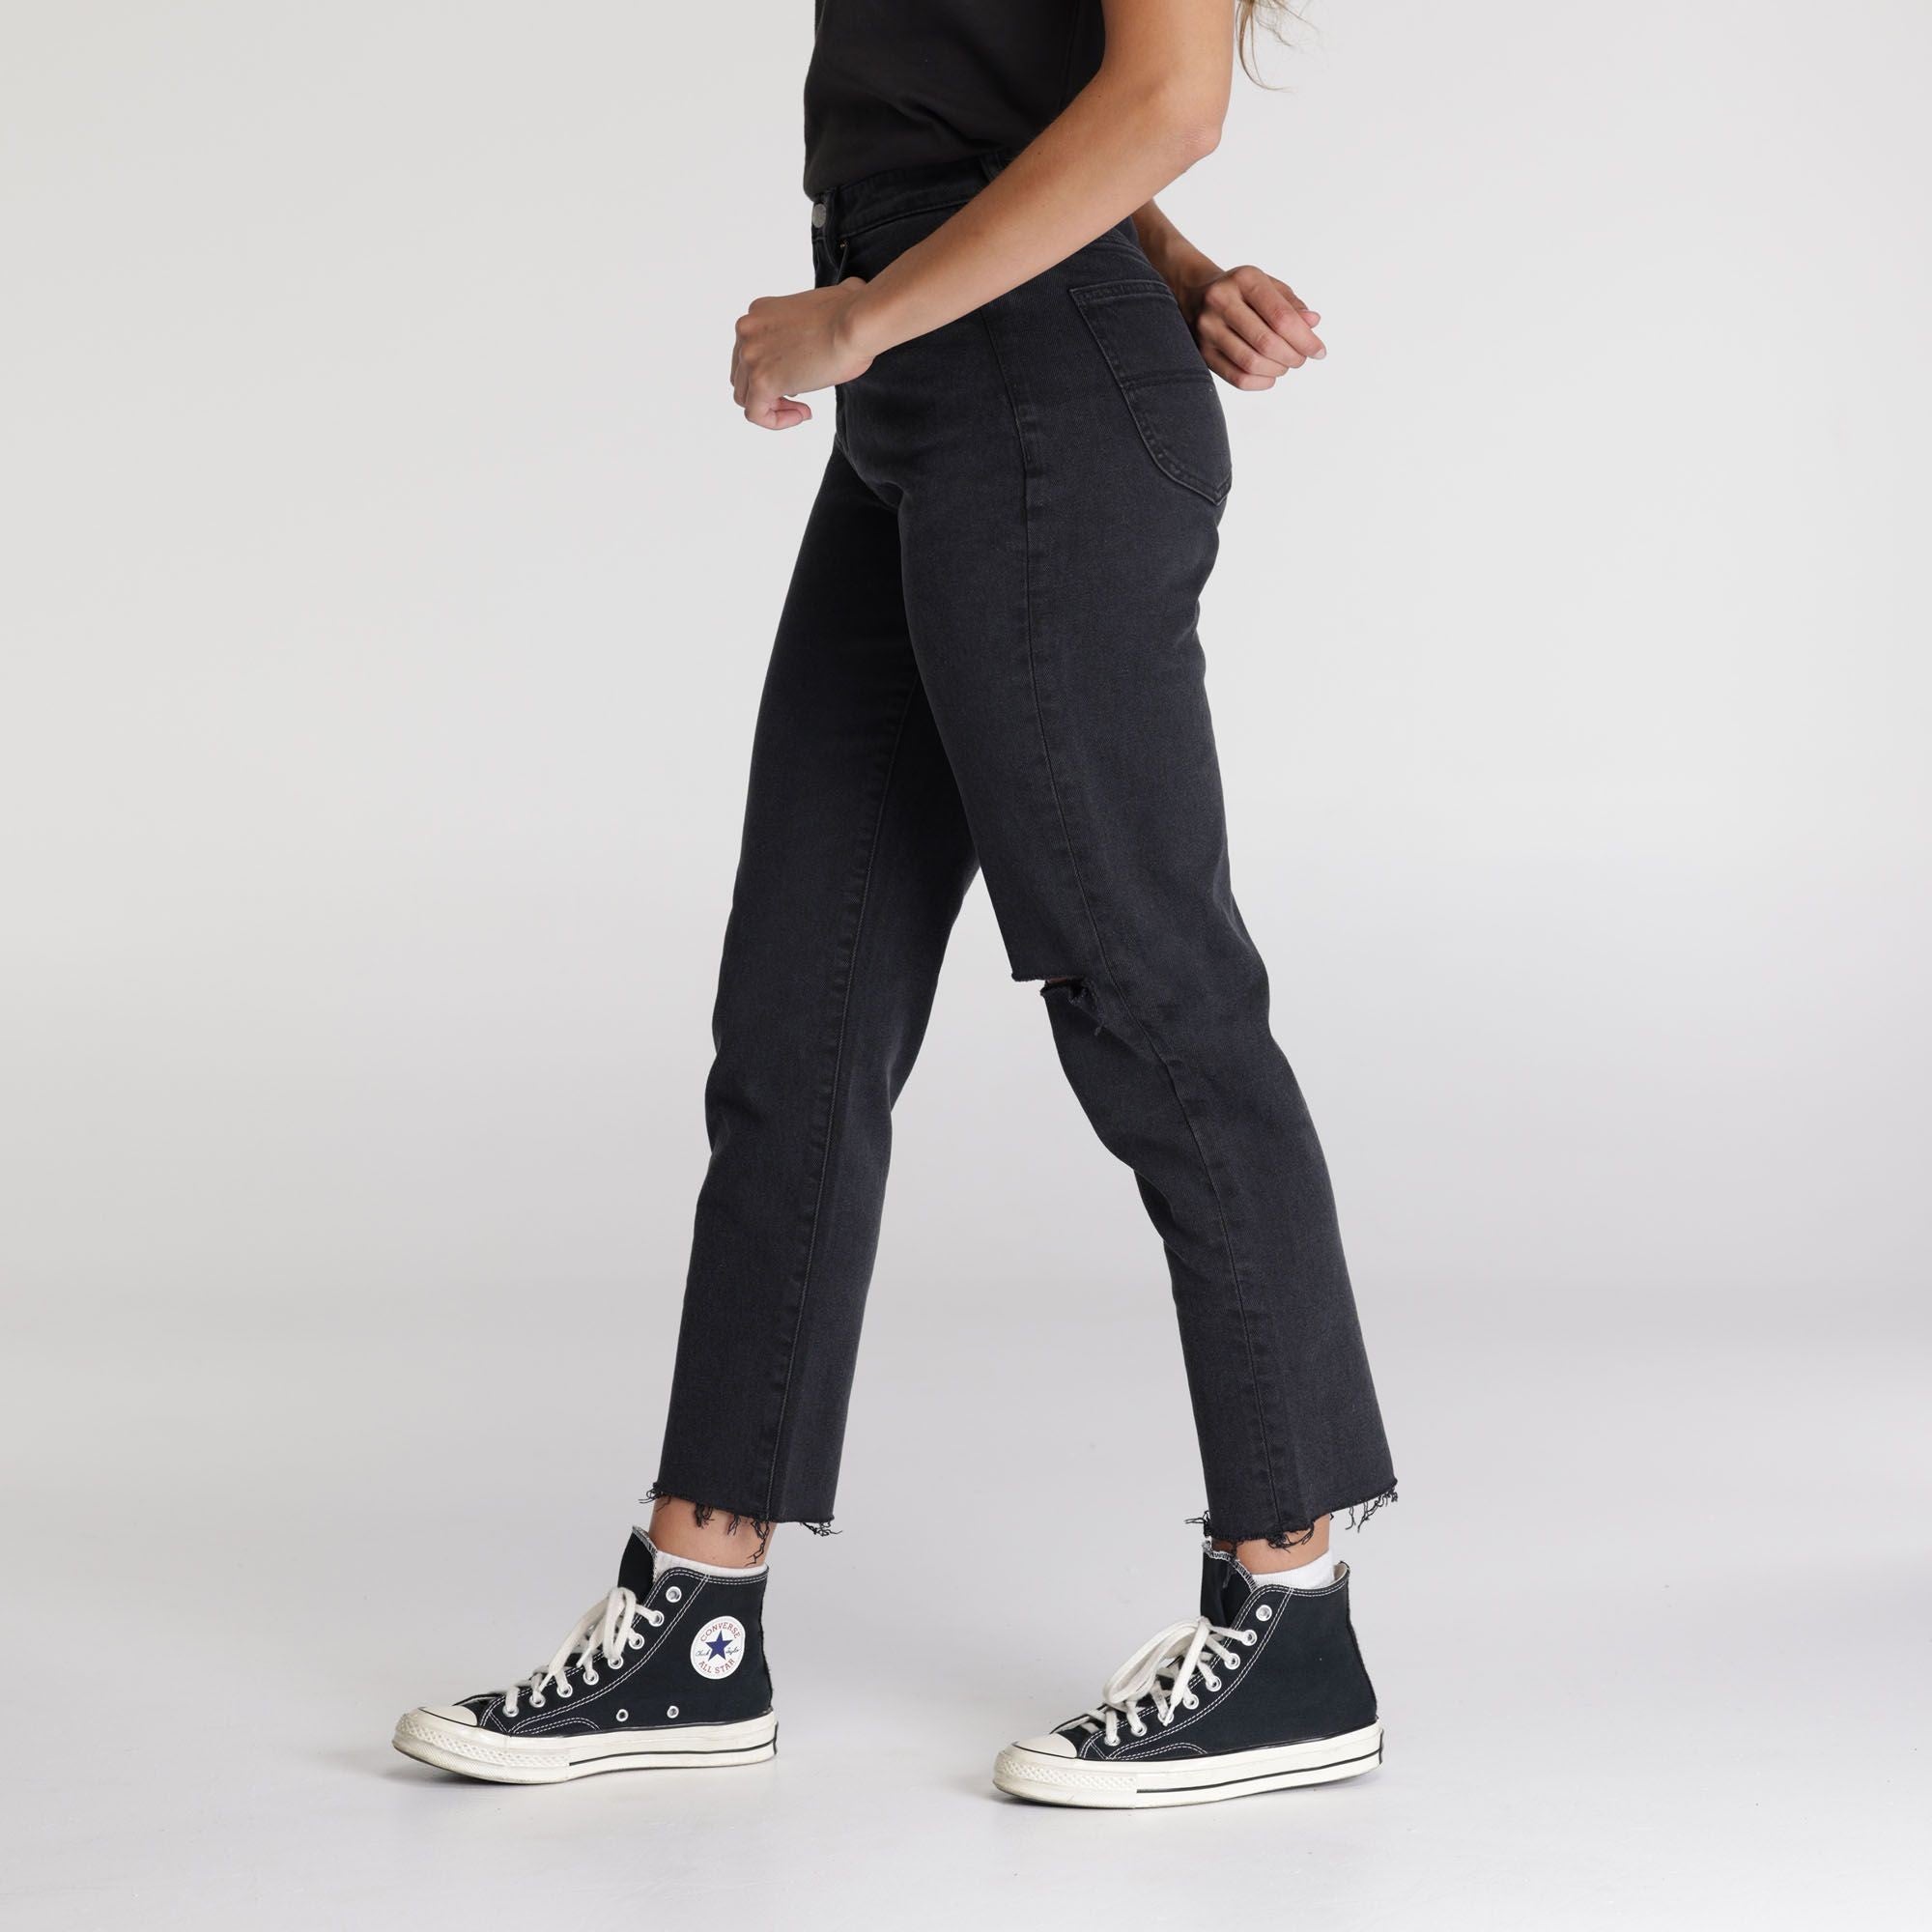 Riders Hi Mom Jean [COLOUR:Washed black SIZE:6]